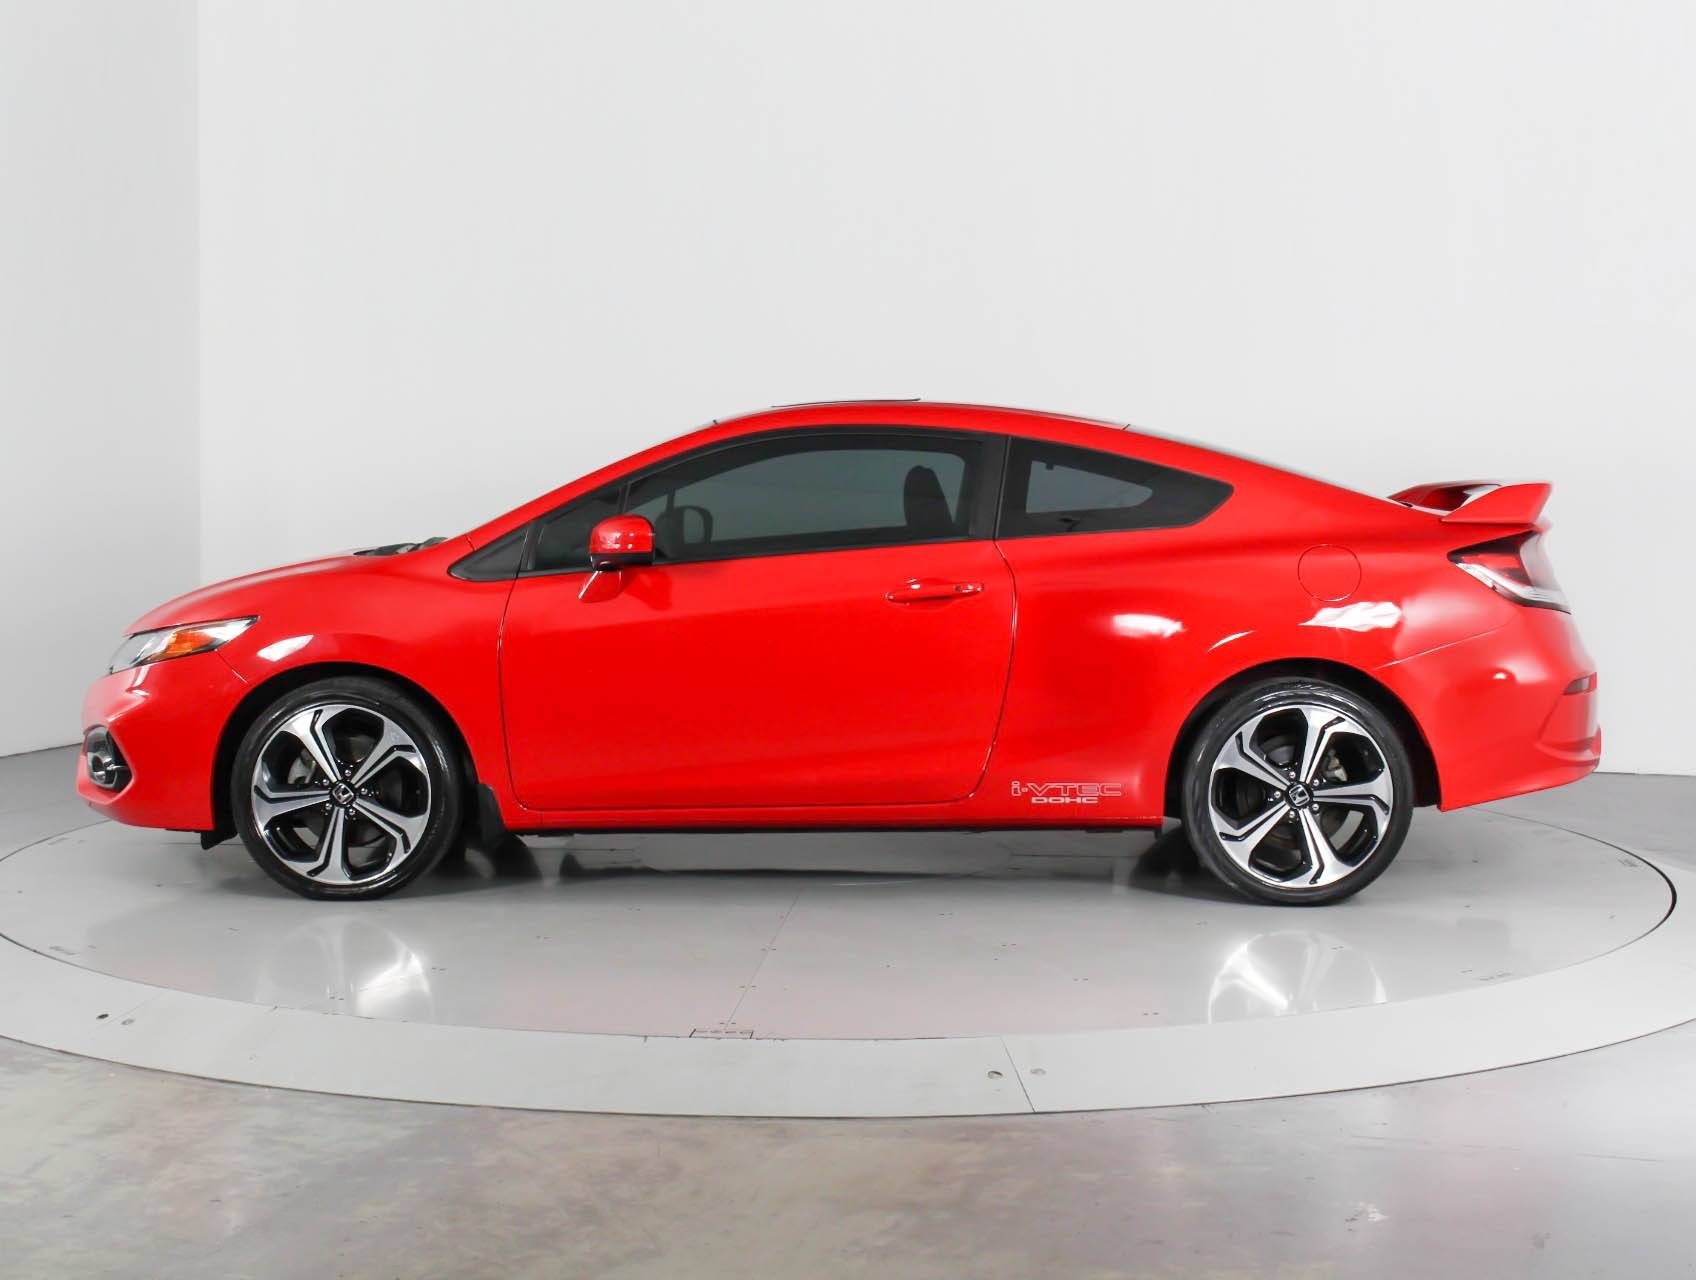 Used HONDA CIVIC SI for sale in PALM | 98093